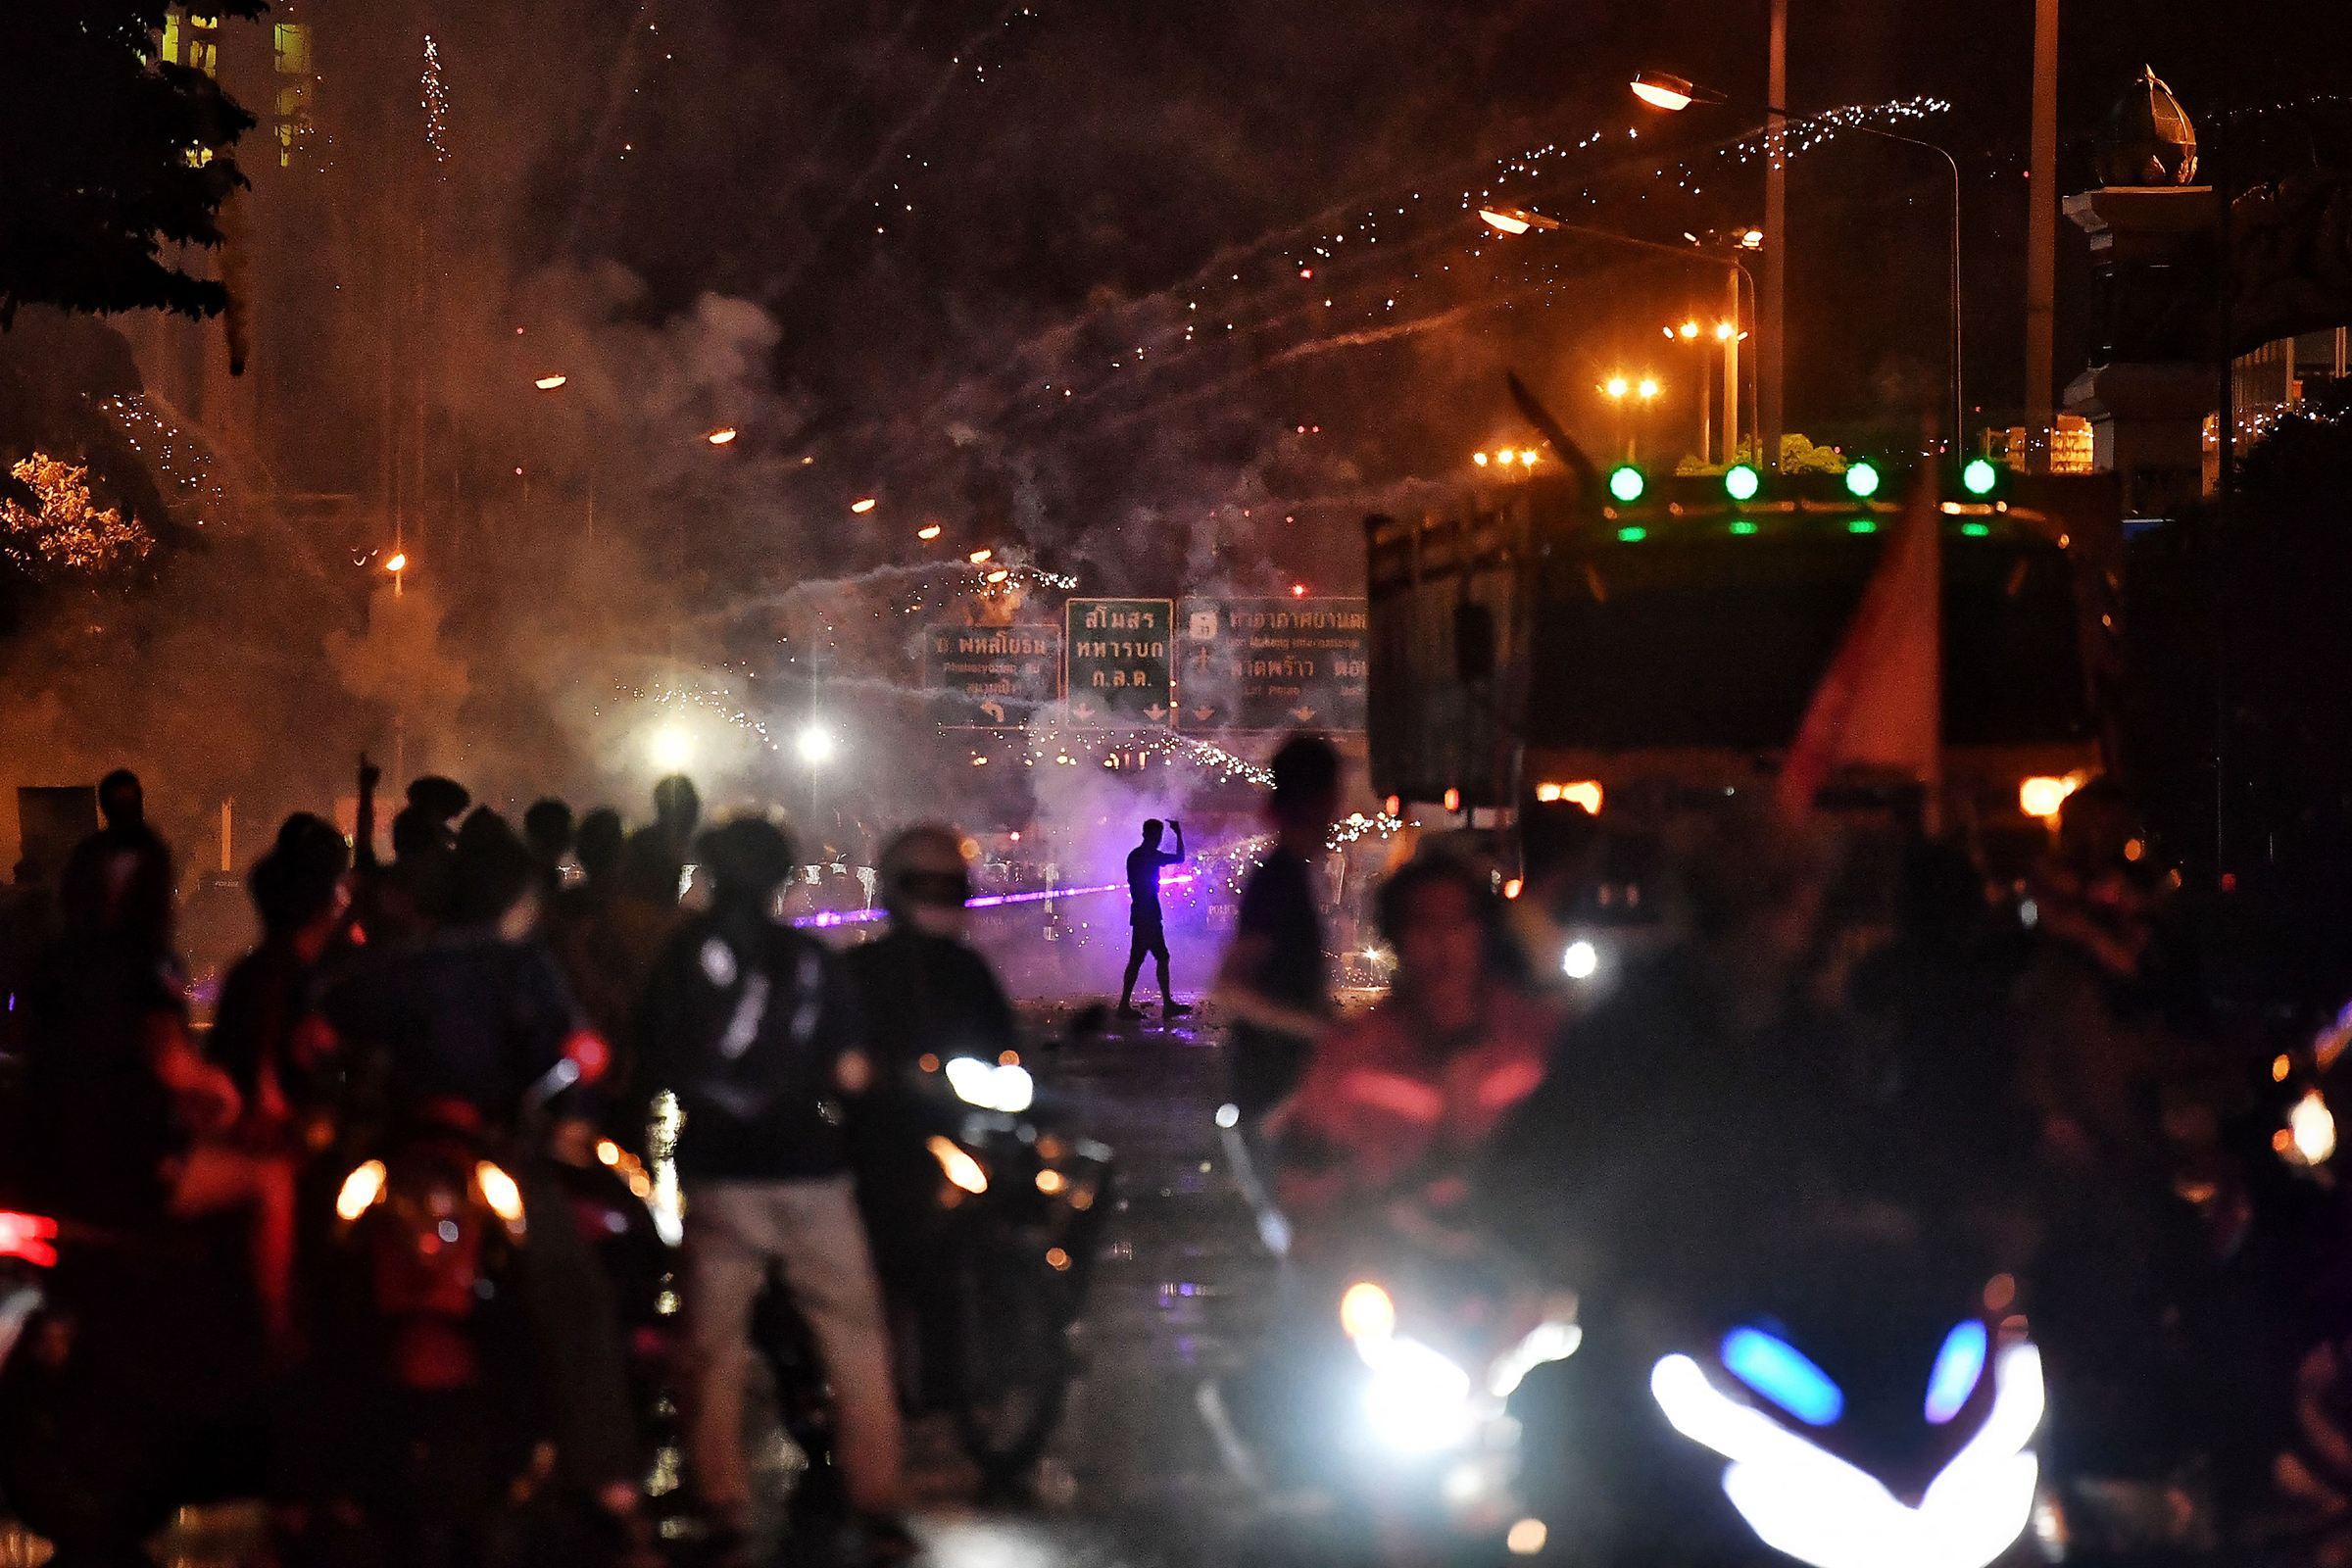 Anti-government protesters set off firecrackers near riot police during a Sept. 5 demonstration in Bangkok calling for the resignation of Thailand's prime minister over the government's coronavirus response. (Lillian Suwanrumpha—AFP/Getty Images)